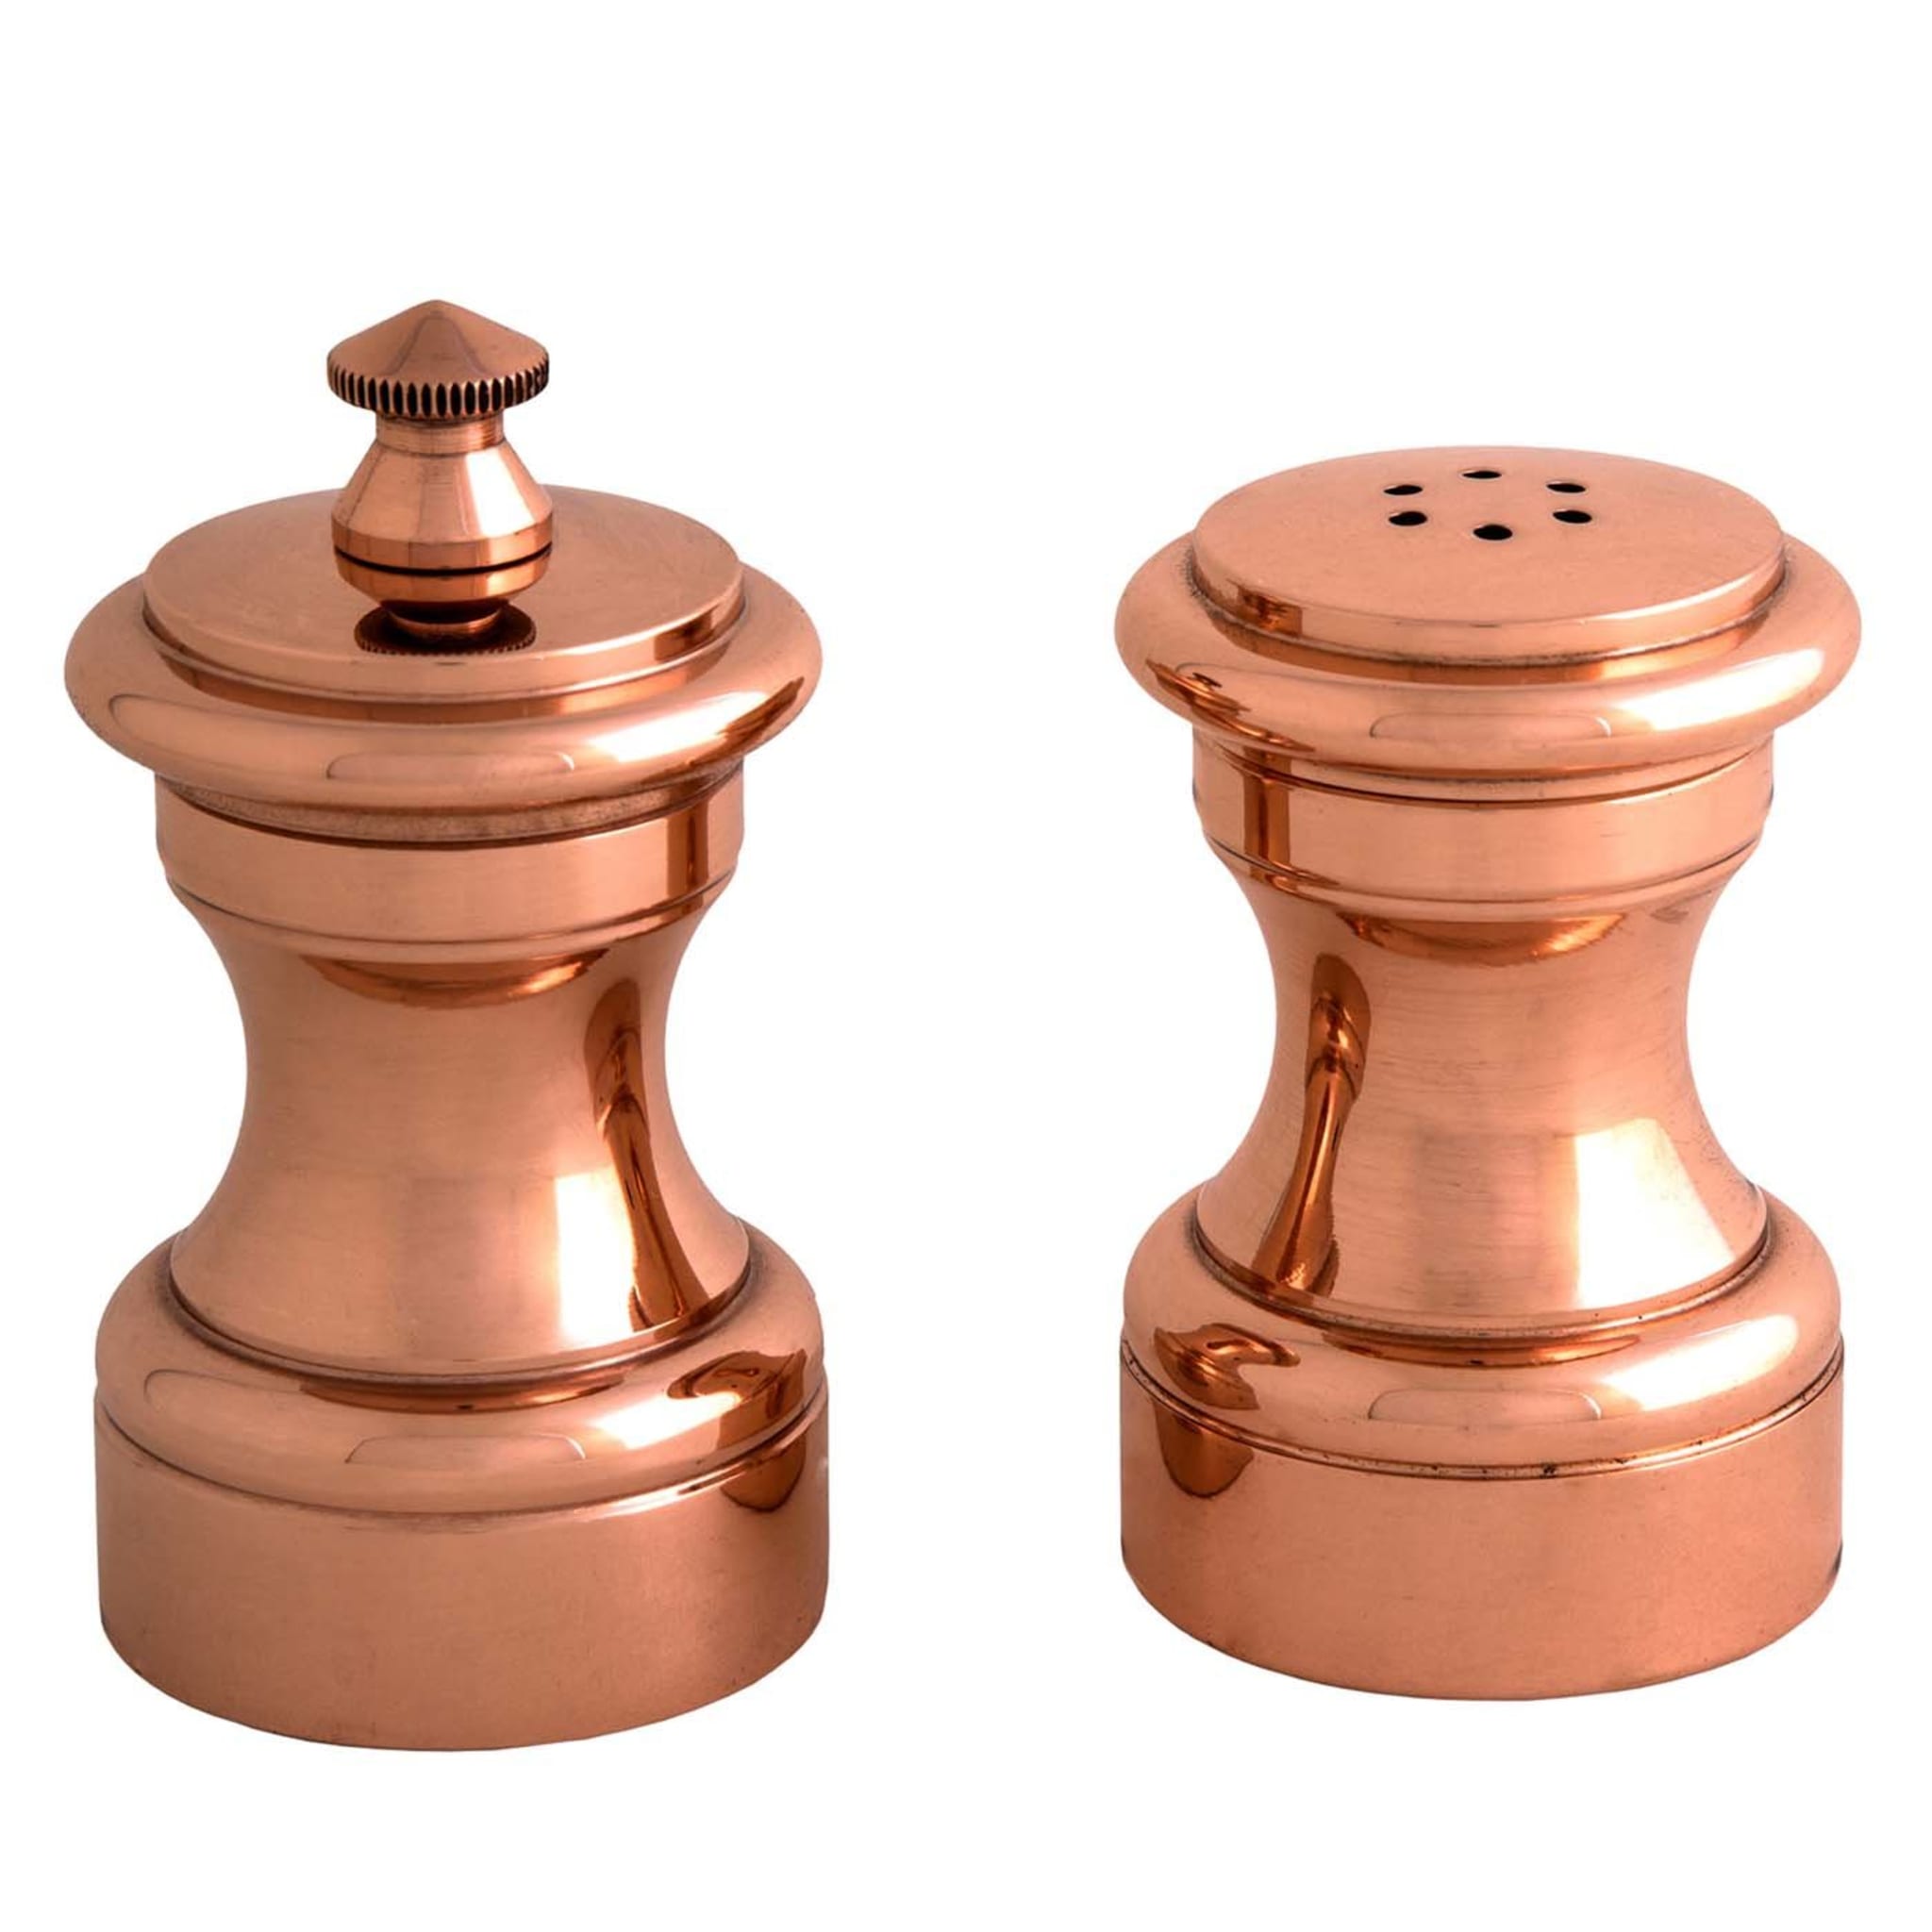 Copper Plated Brass Pepper Mill And Salt Shaker #1 - Main view